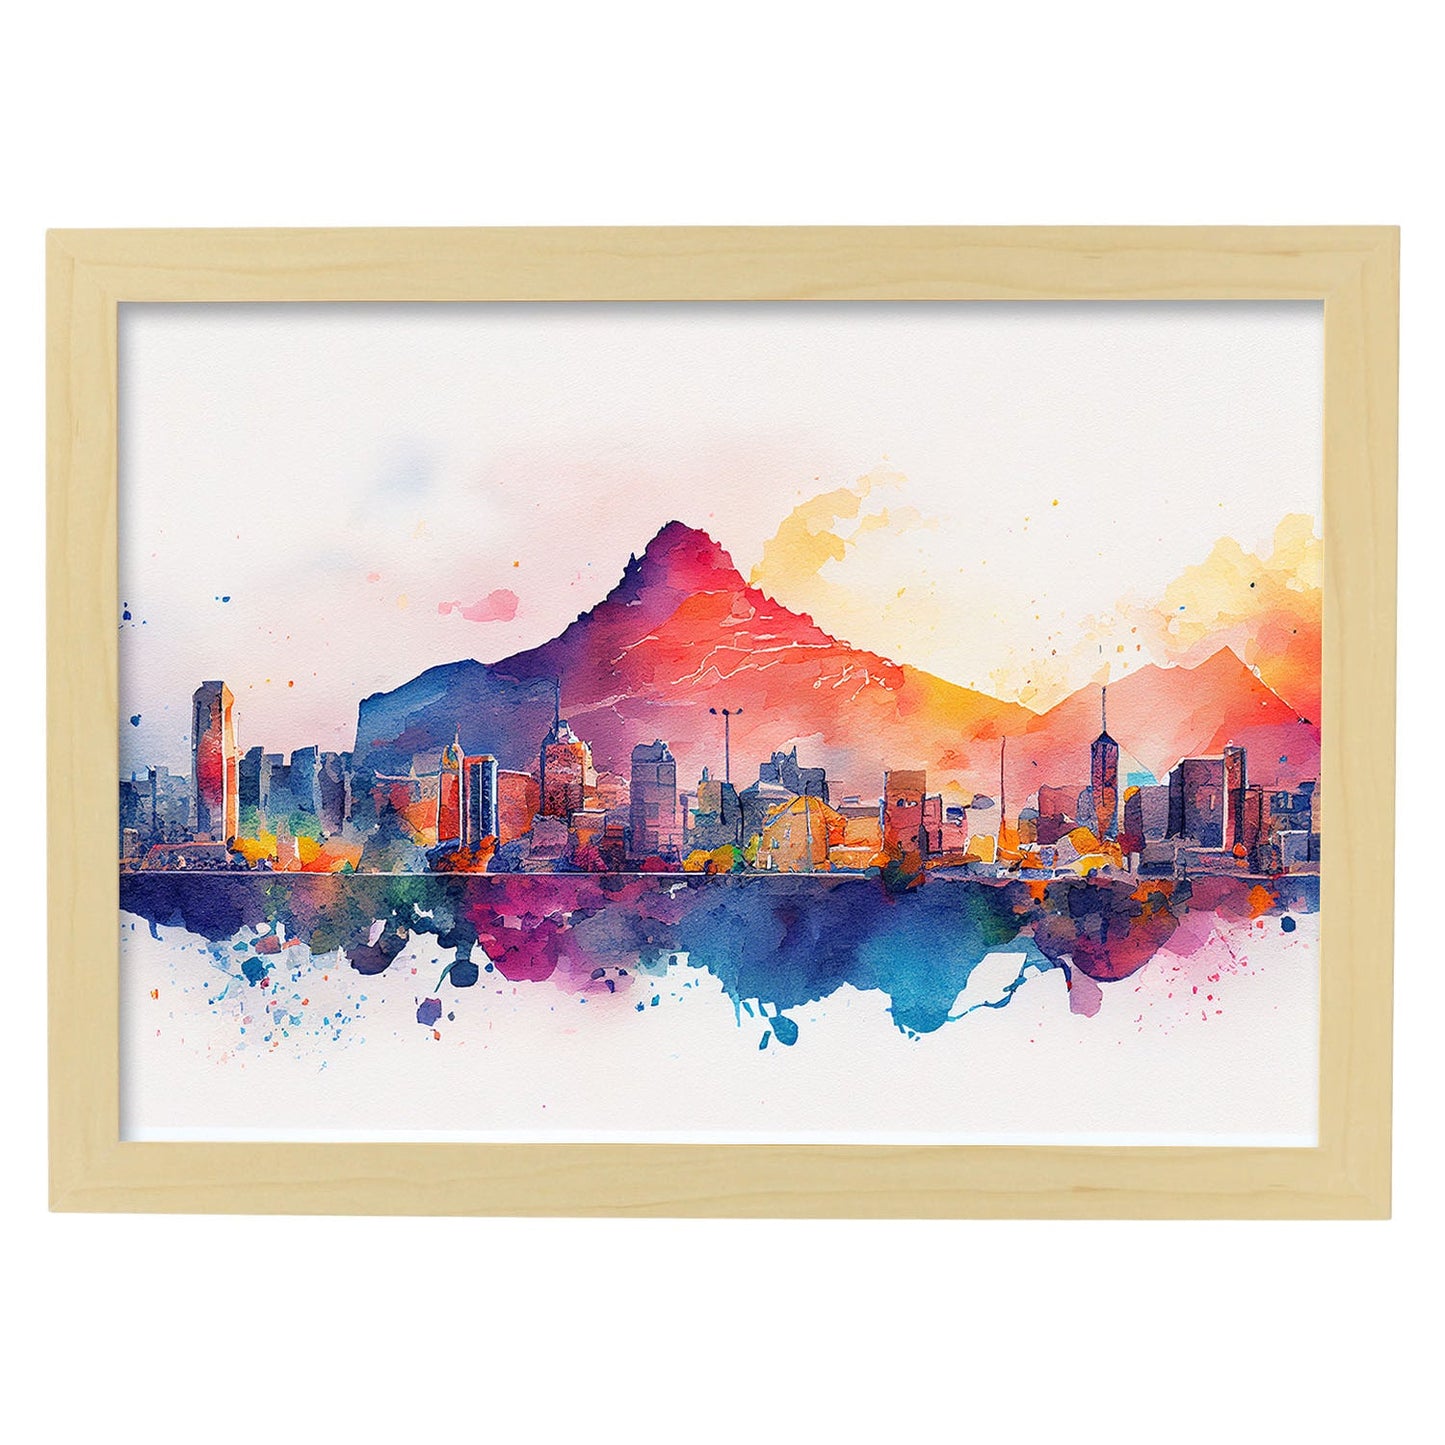 Nacnic watercolor of a skyline of the city of Cape Town_1. Aesthetic Wall Art Prints for Bedroom or Living Room Design.-Artwork-Nacnic-A4-Marco Madera Clara-Nacnic Estudio SL